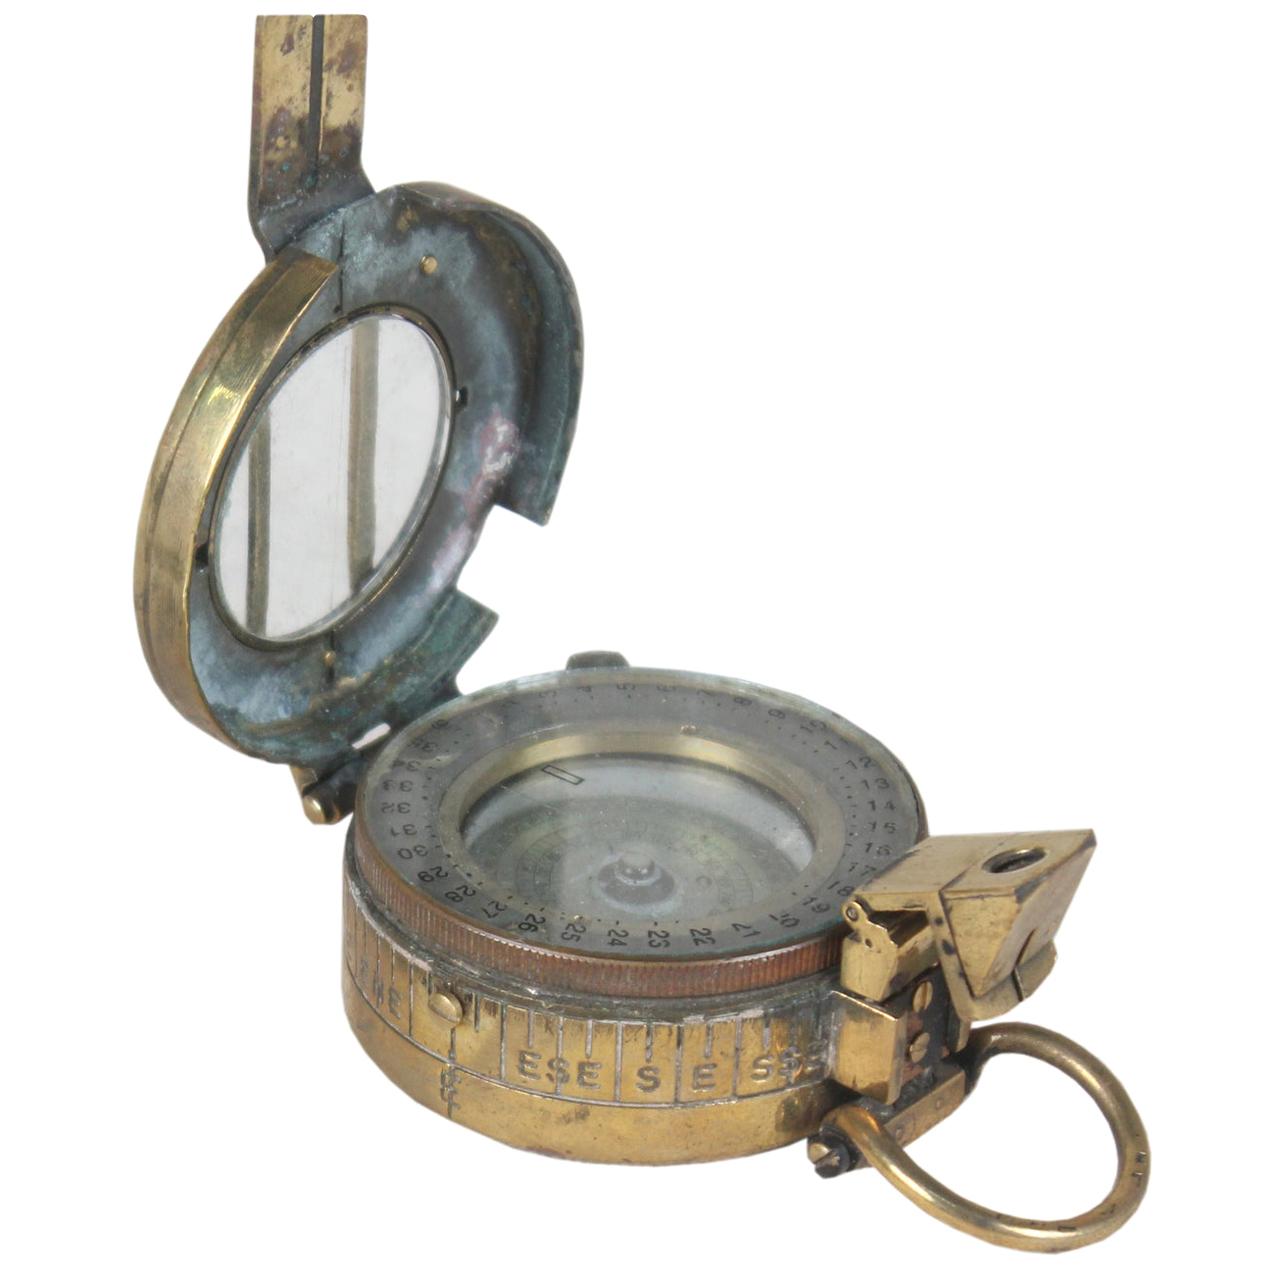 Details about   SOLID BRASS *STANLEY LONDON SHIP POCKET COMPASS WITH PUSH BUTTON GIFT/COLLECTIBL 